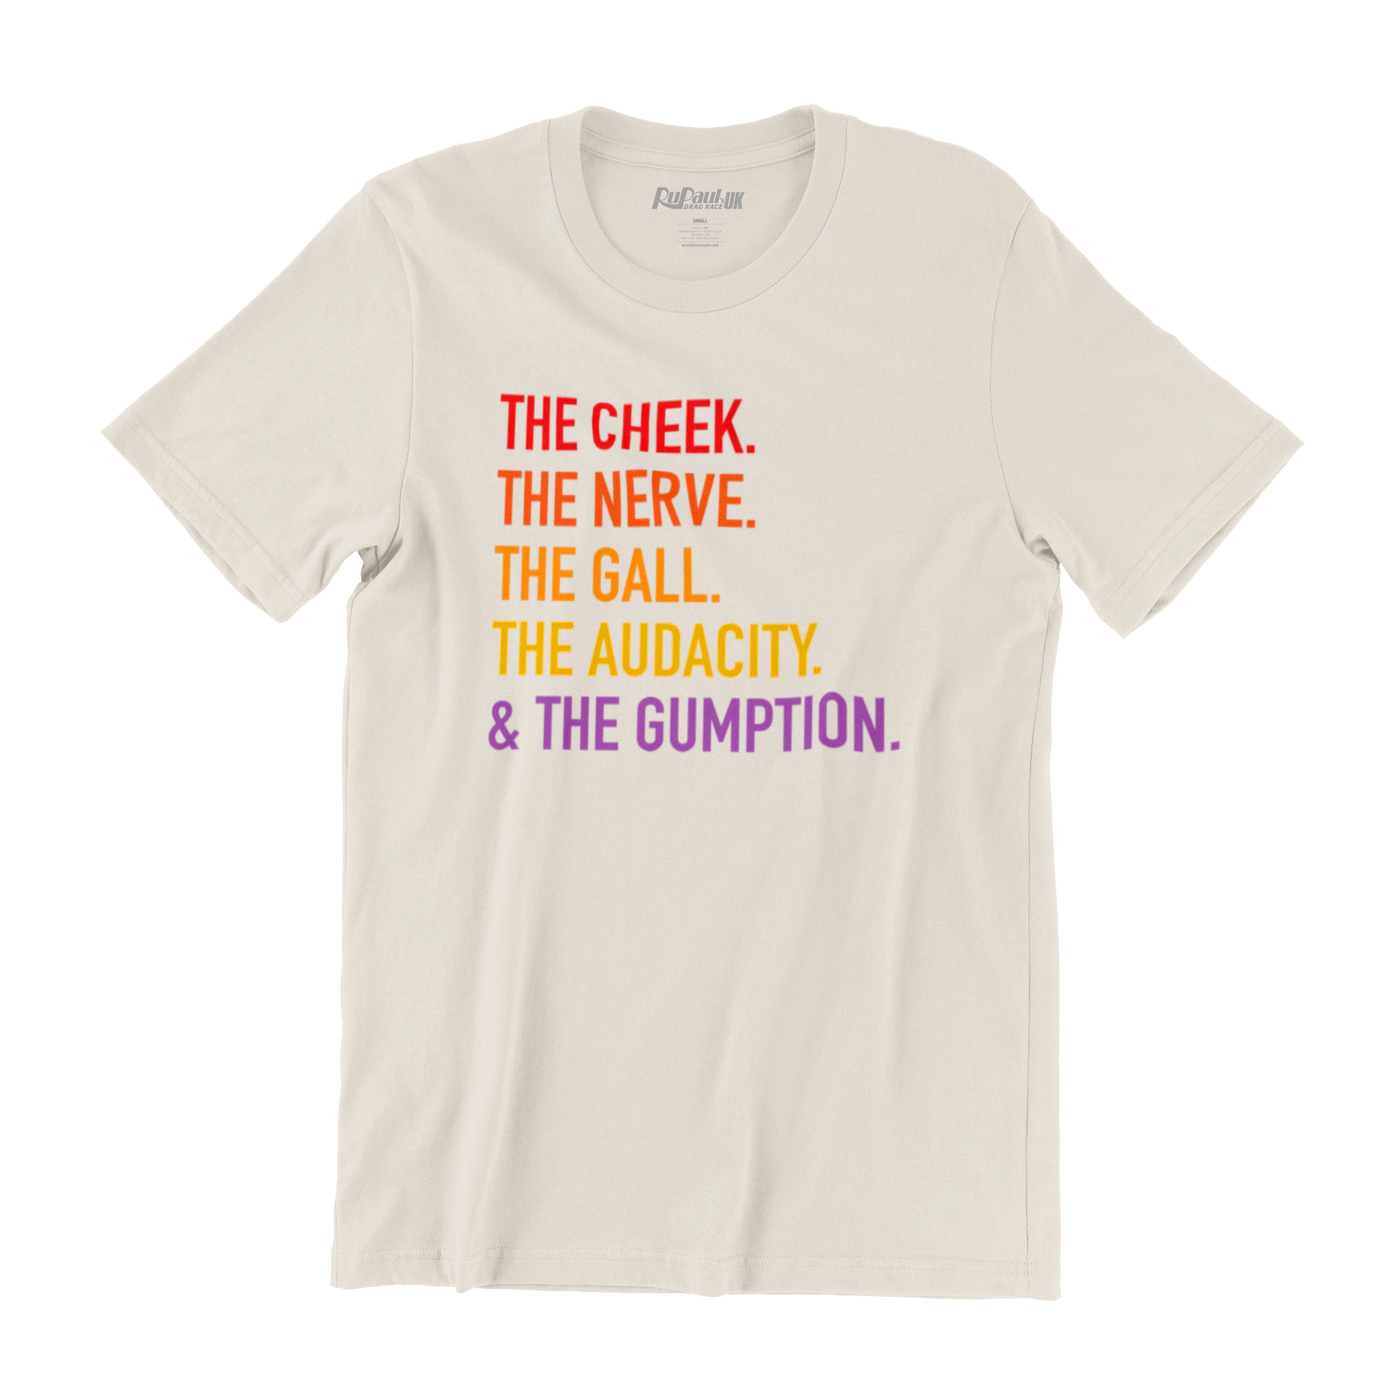 The Cheek, The Nerve, The Gall and The Gumption T-Shirt